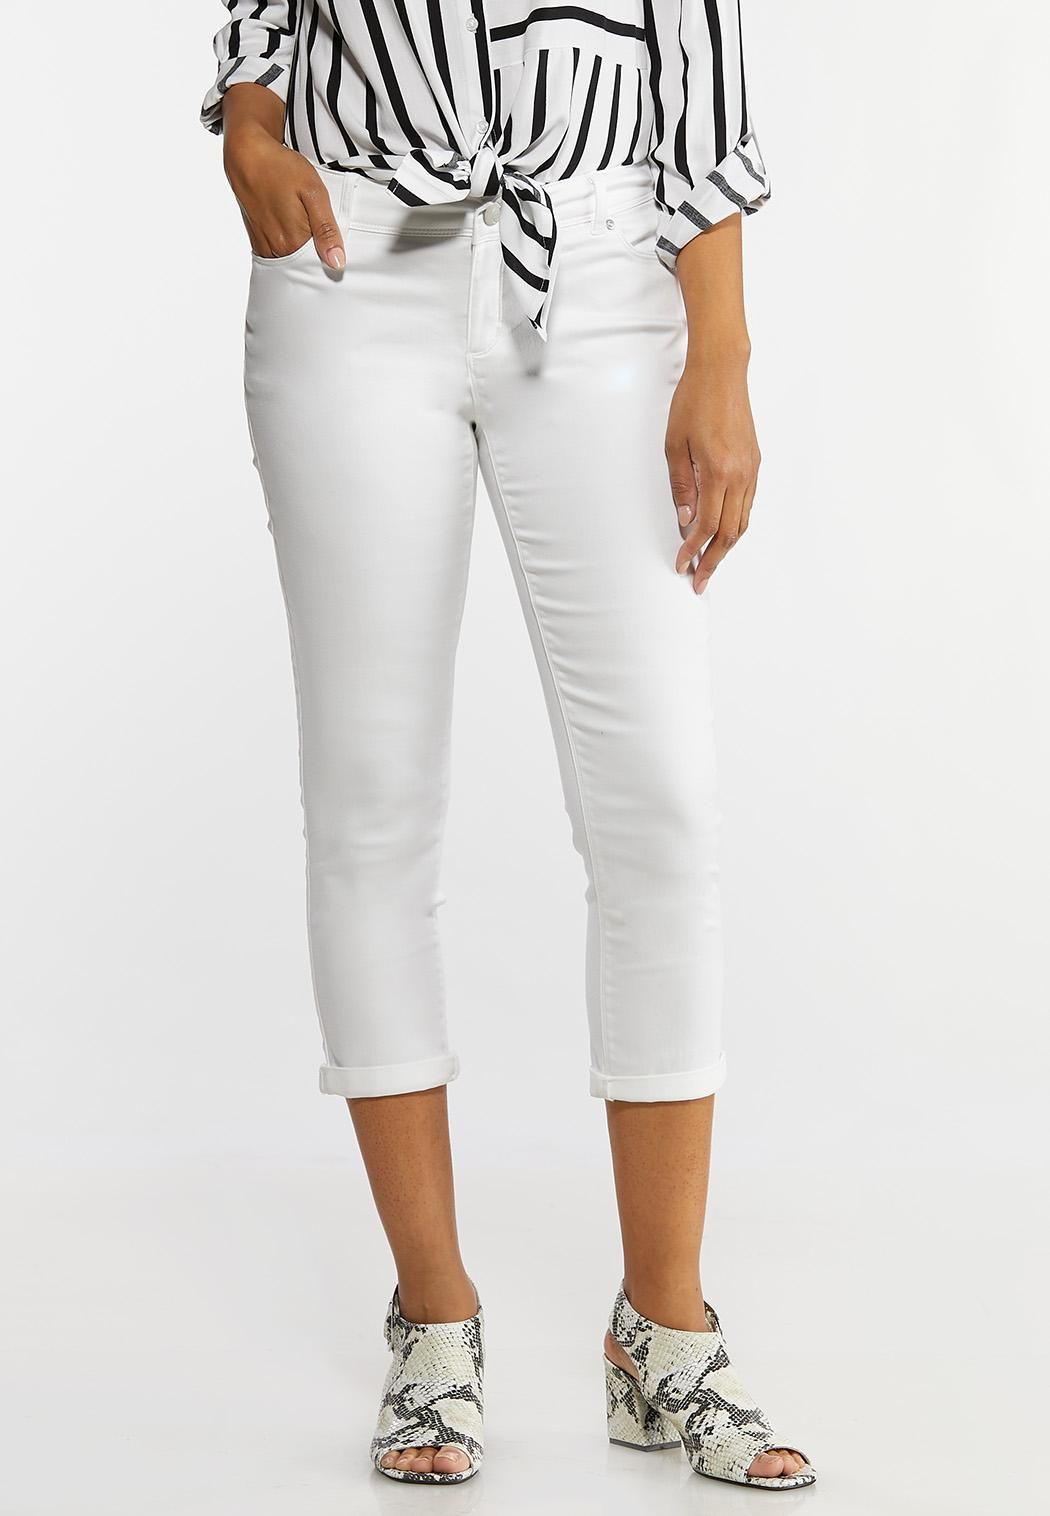 White Skinny Ankle Jeans | Cato Fashions